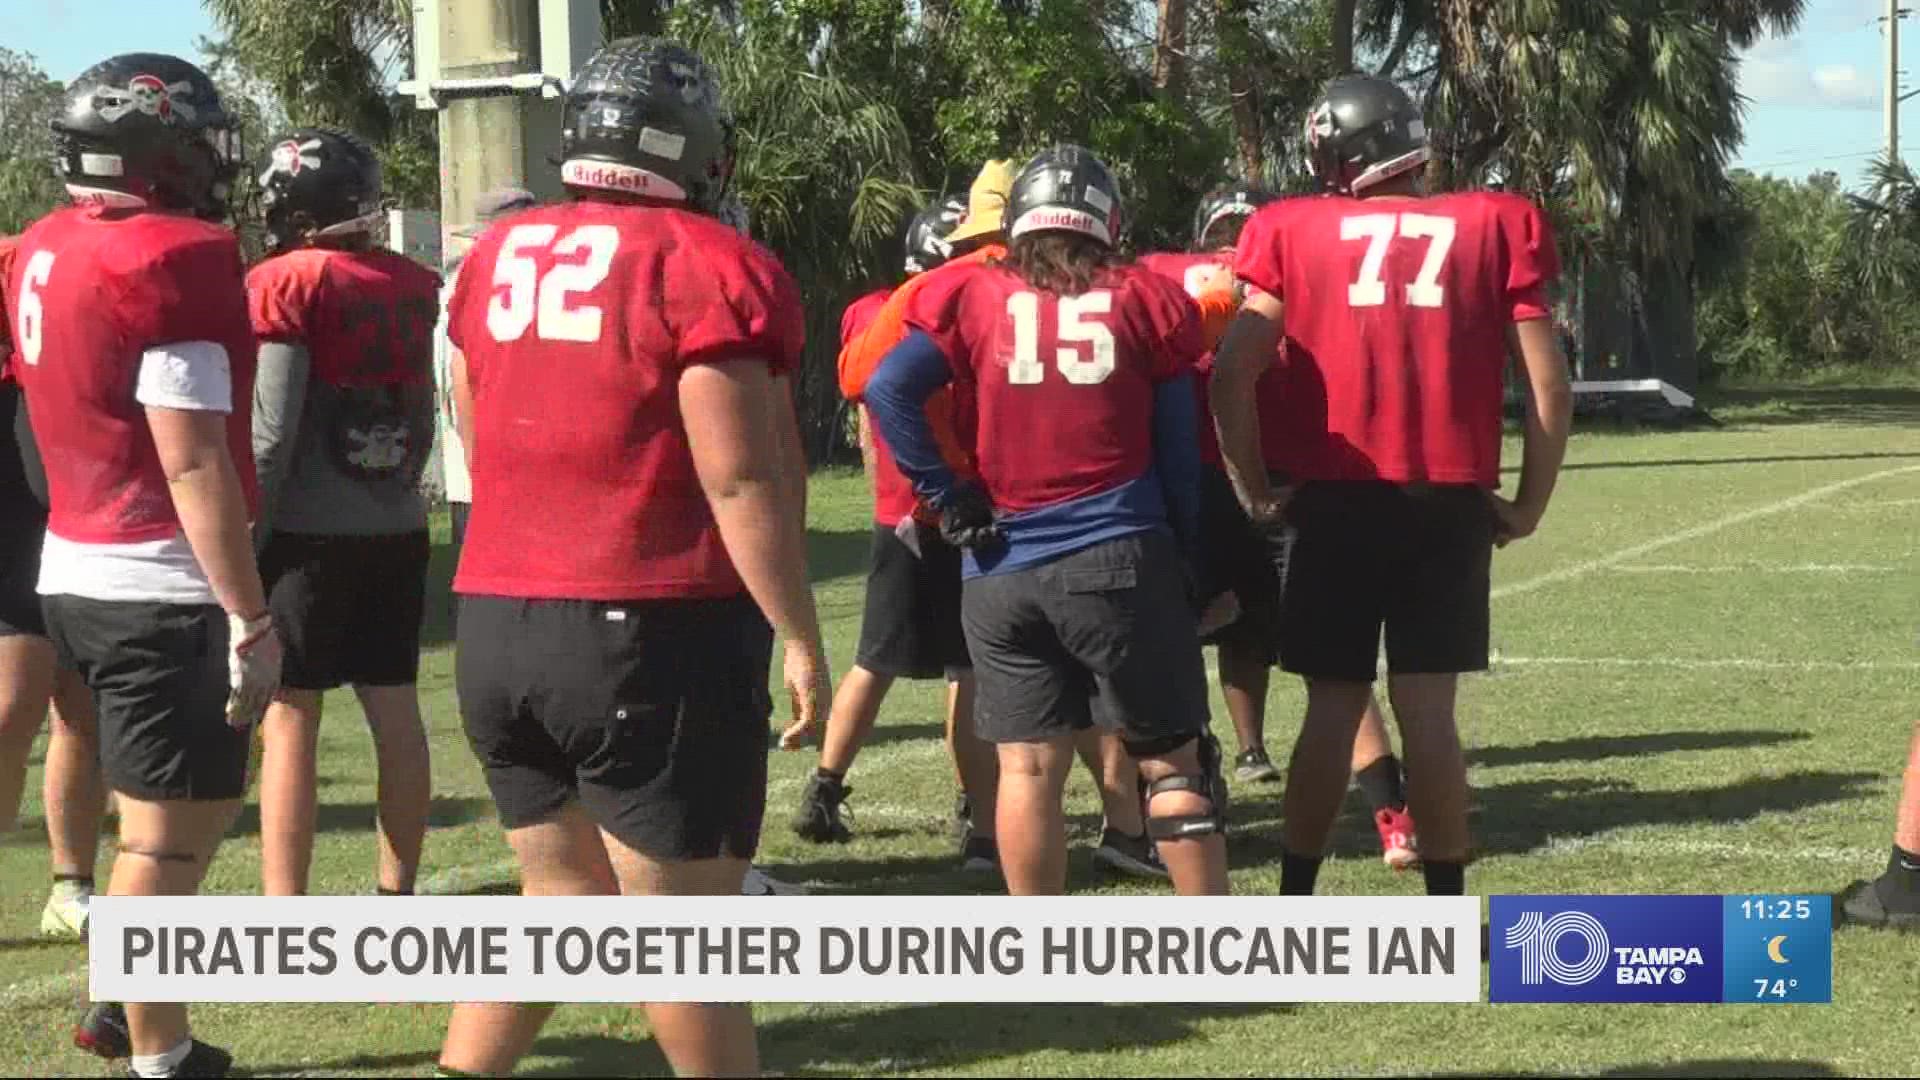 Without electricity or water, the Port Charlotte football players practiced on their own during Hurricane Ian.